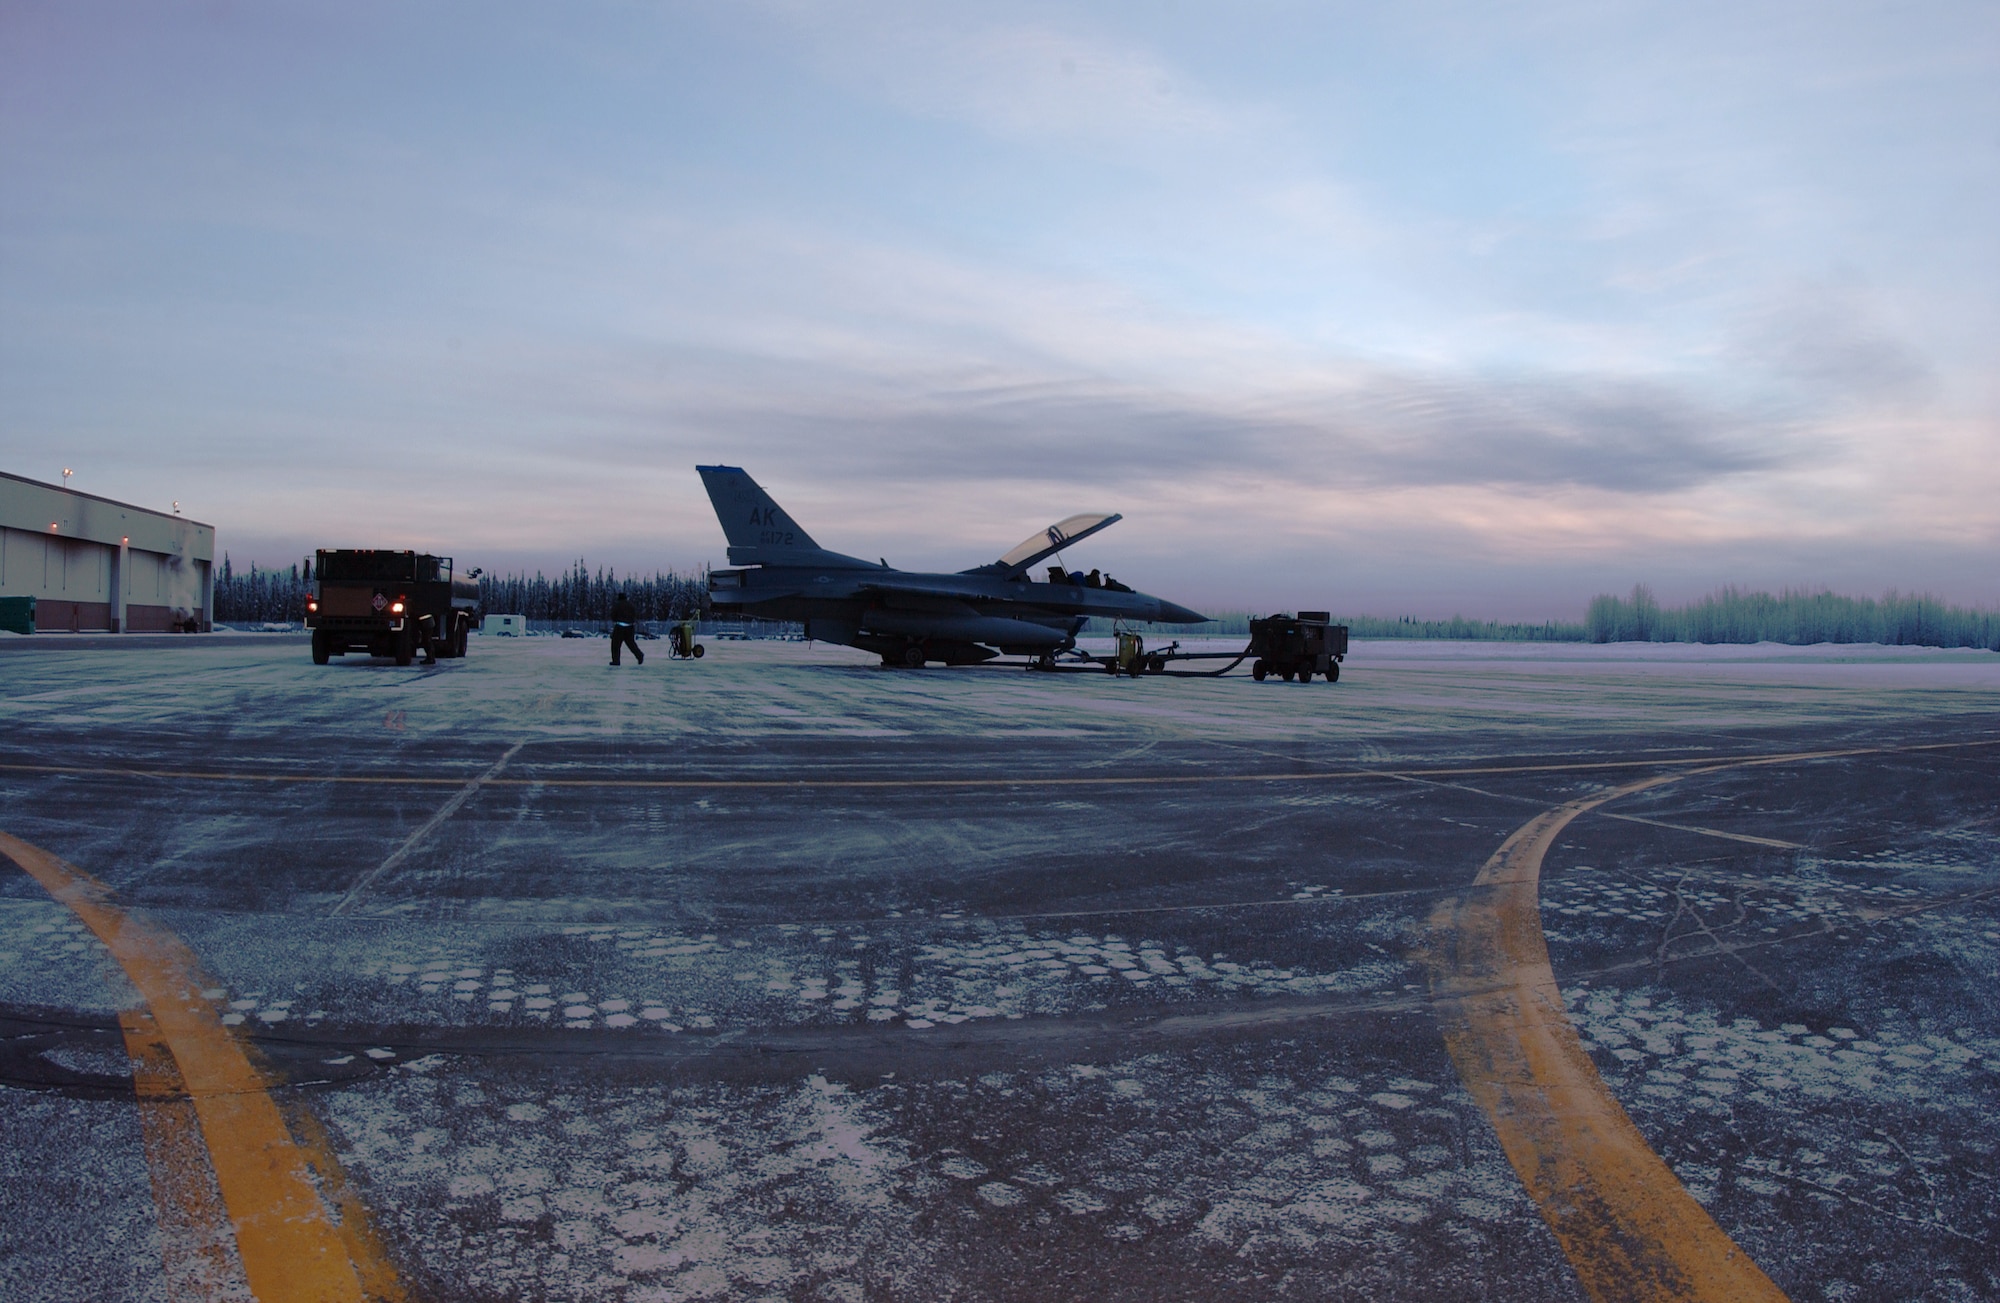 EIELSON AIR FORCE BASE, Alaska -- Icemen of the 354 Maintenance Squadron de-fuels an F-16 Fighting Falcon on the Flight Line, Dec. 21. Today is Winter Solstice, the shortest day of the year. At Eielson Air Force Base the sun rose at 1052 and set at 1441 today resulting in a total of 3 hours and 49 minutes from sun up to sun down. This night will be extra dark due to the moon being completely below the horizon all day resulting in 0% moonlight illumination.
(U.S. Air Force Photo by Airman Jonathan Snyder)